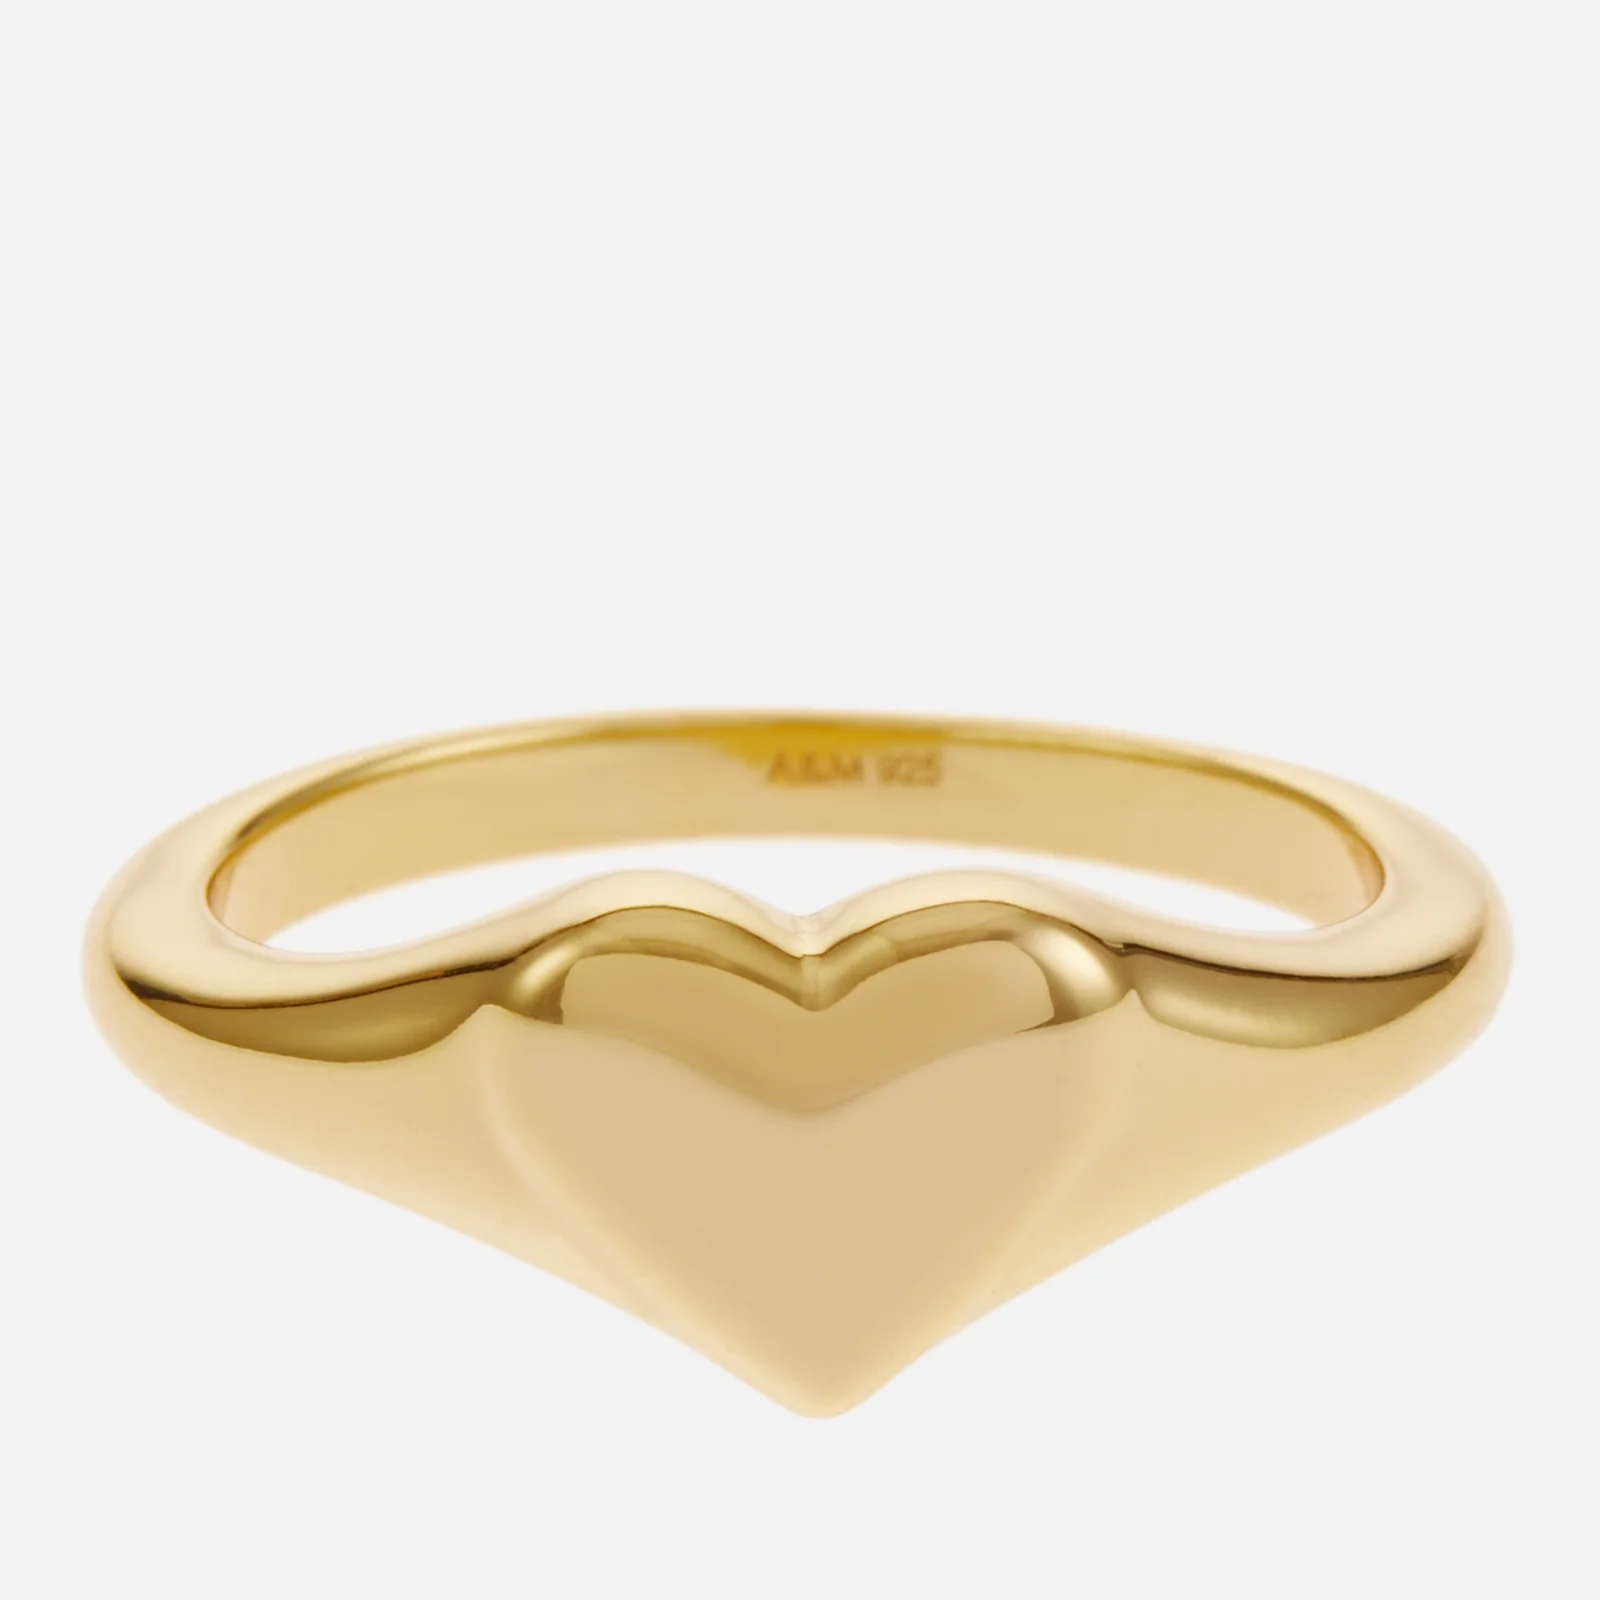 Astrid & Miyu Heart 18K Gold-Plated Sterling Silver Signet Ring Image 1